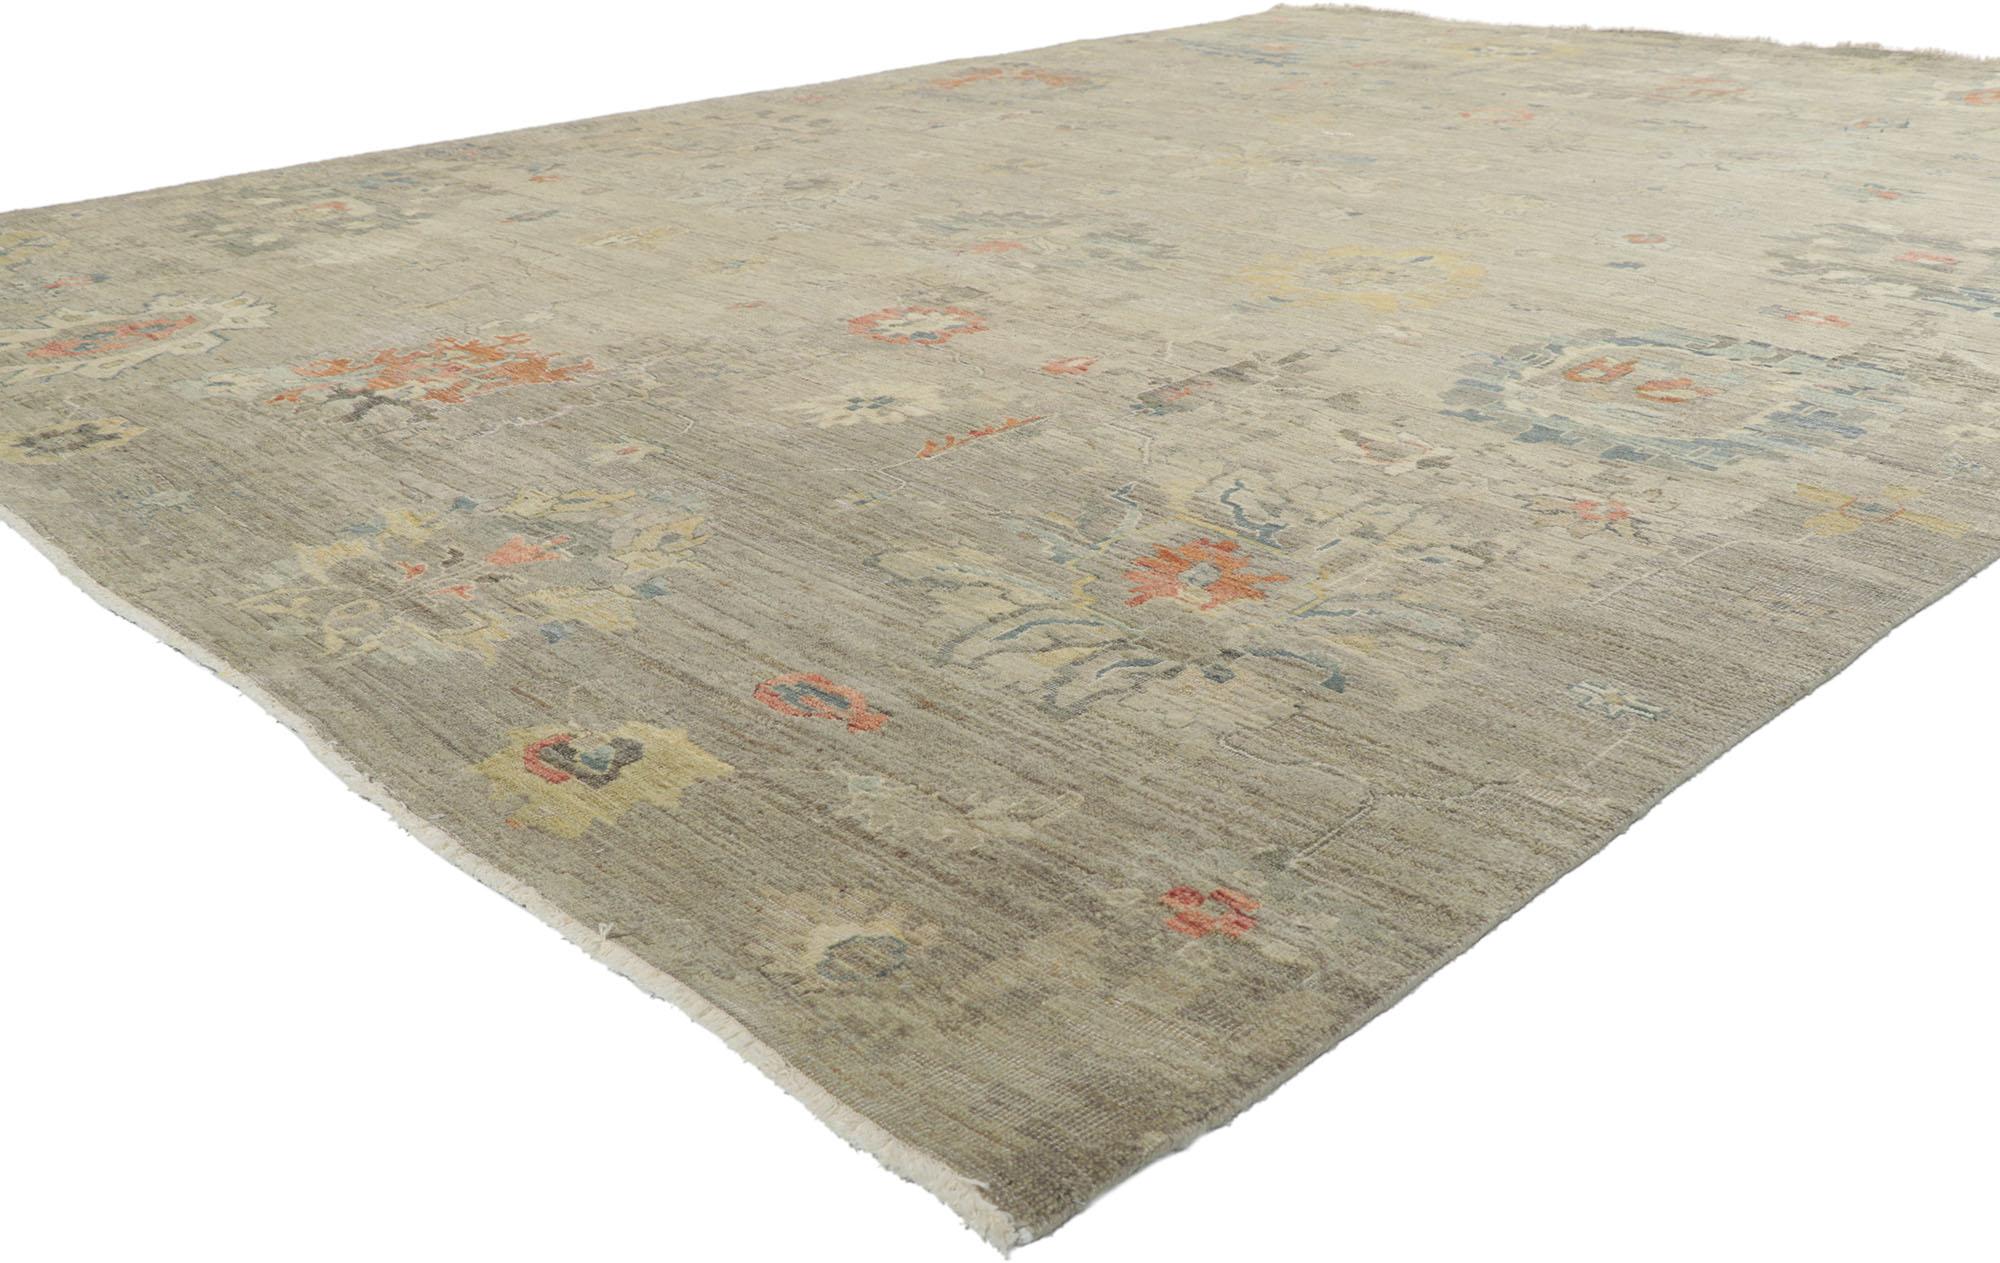 30716 New Contemporary Distressed Area rug with Modern Style 08'07 x 11'07. With its neutral colors and weathered beauty combined with nostalgic charm, this new contemporary distressed rug creates an inimitable warmth and calming ambiance. The